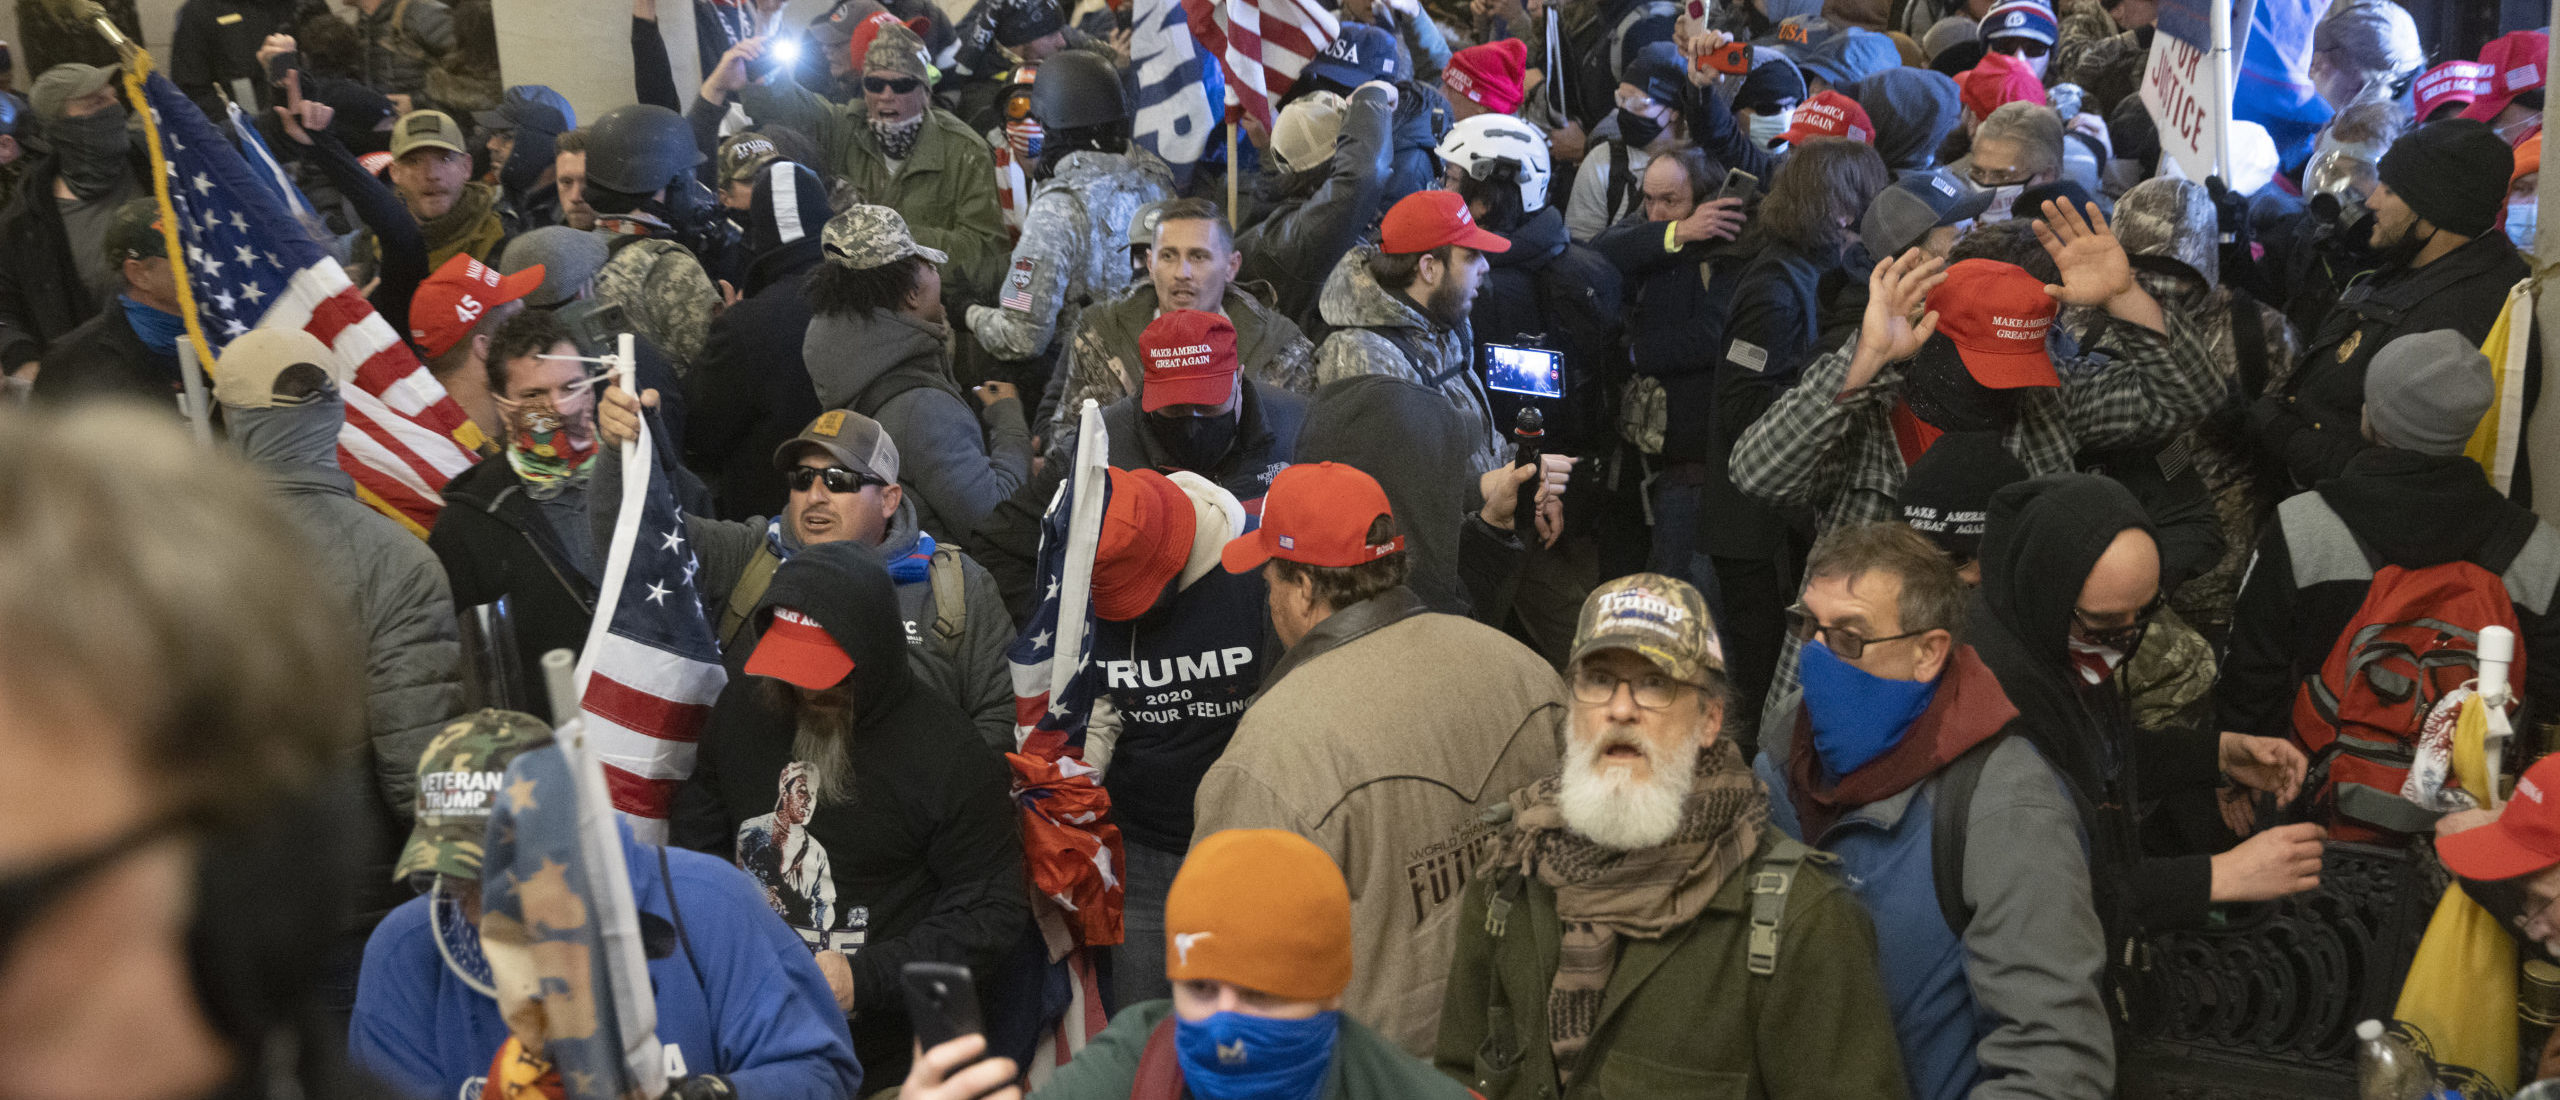 Protesters supporting U.S. President Donald Trump gather near the east front door of the U.S. Capitol after groups breached the building's security on January 06, 2021.